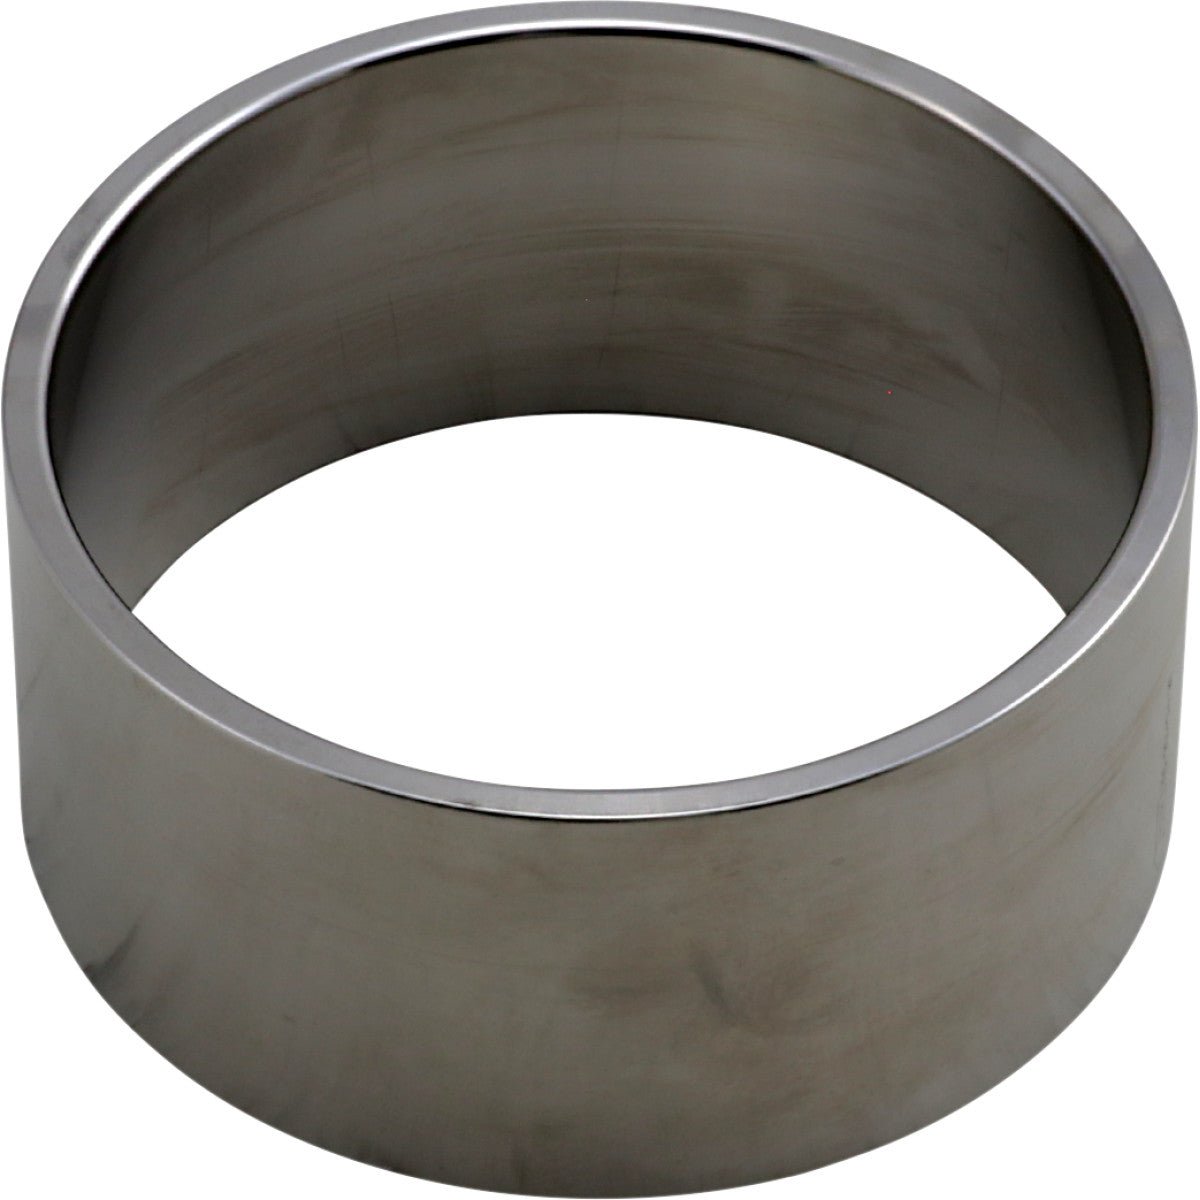 Solas High Performance Stainless Sea Doo 156mm Wear Ring GTI 130 155 ACE GTX 4-TEC RXP 155 170 SR-HS-156-001